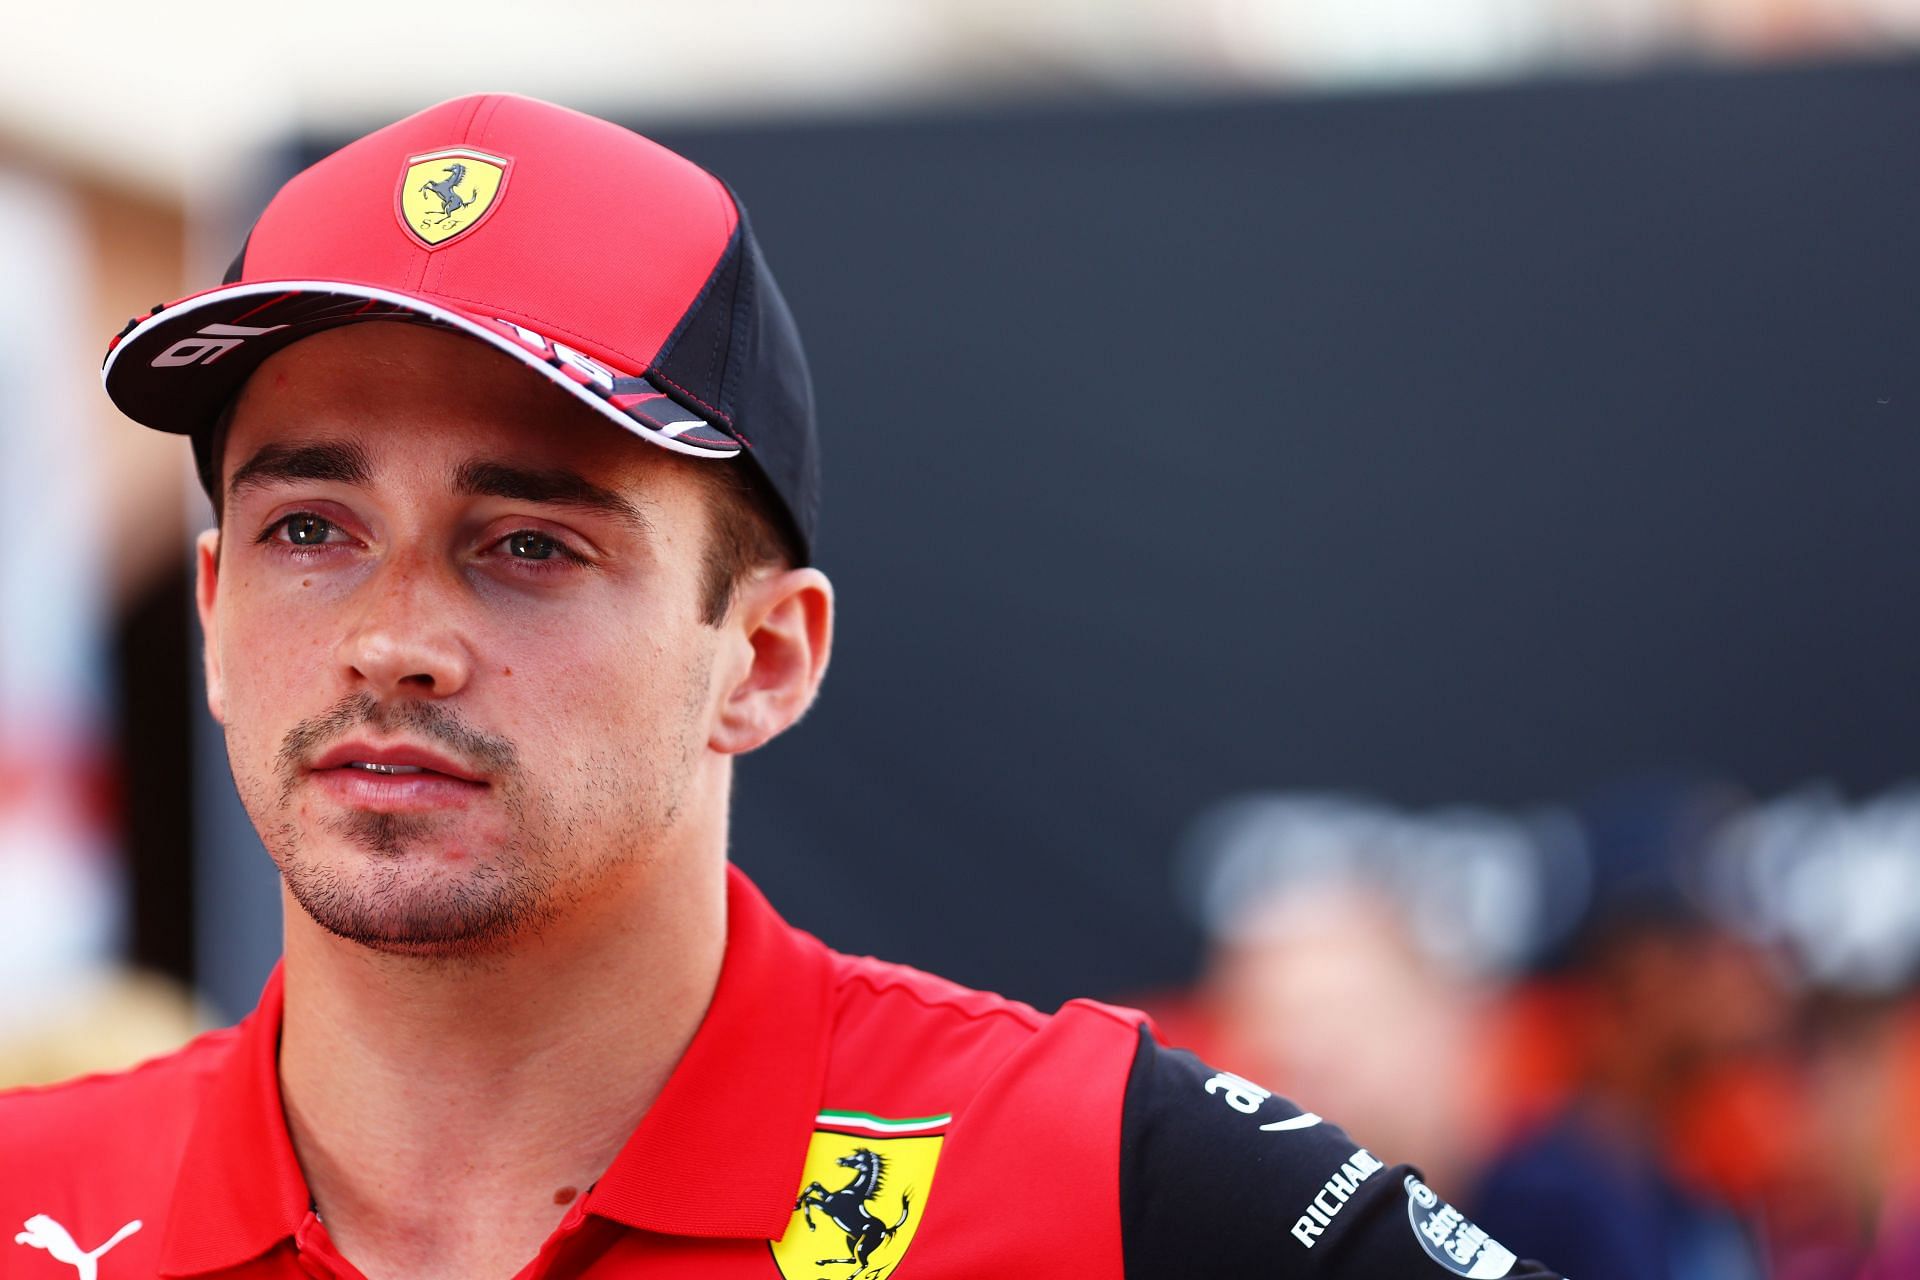 Charles Leclerc is confident of a positive weekend in his home race